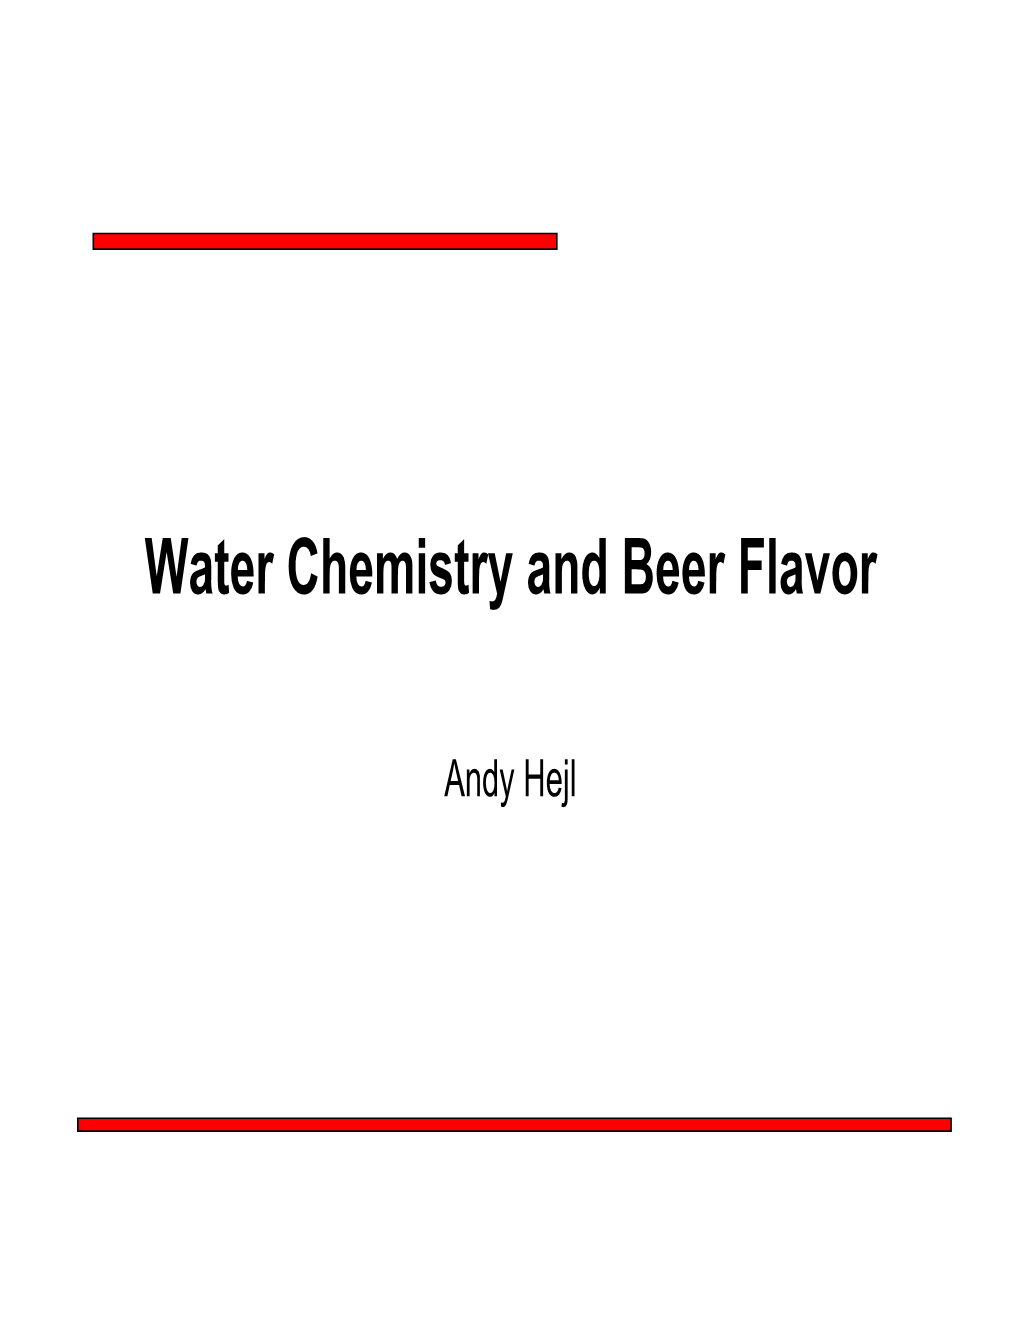 Water Chemistry and Beer Flavor